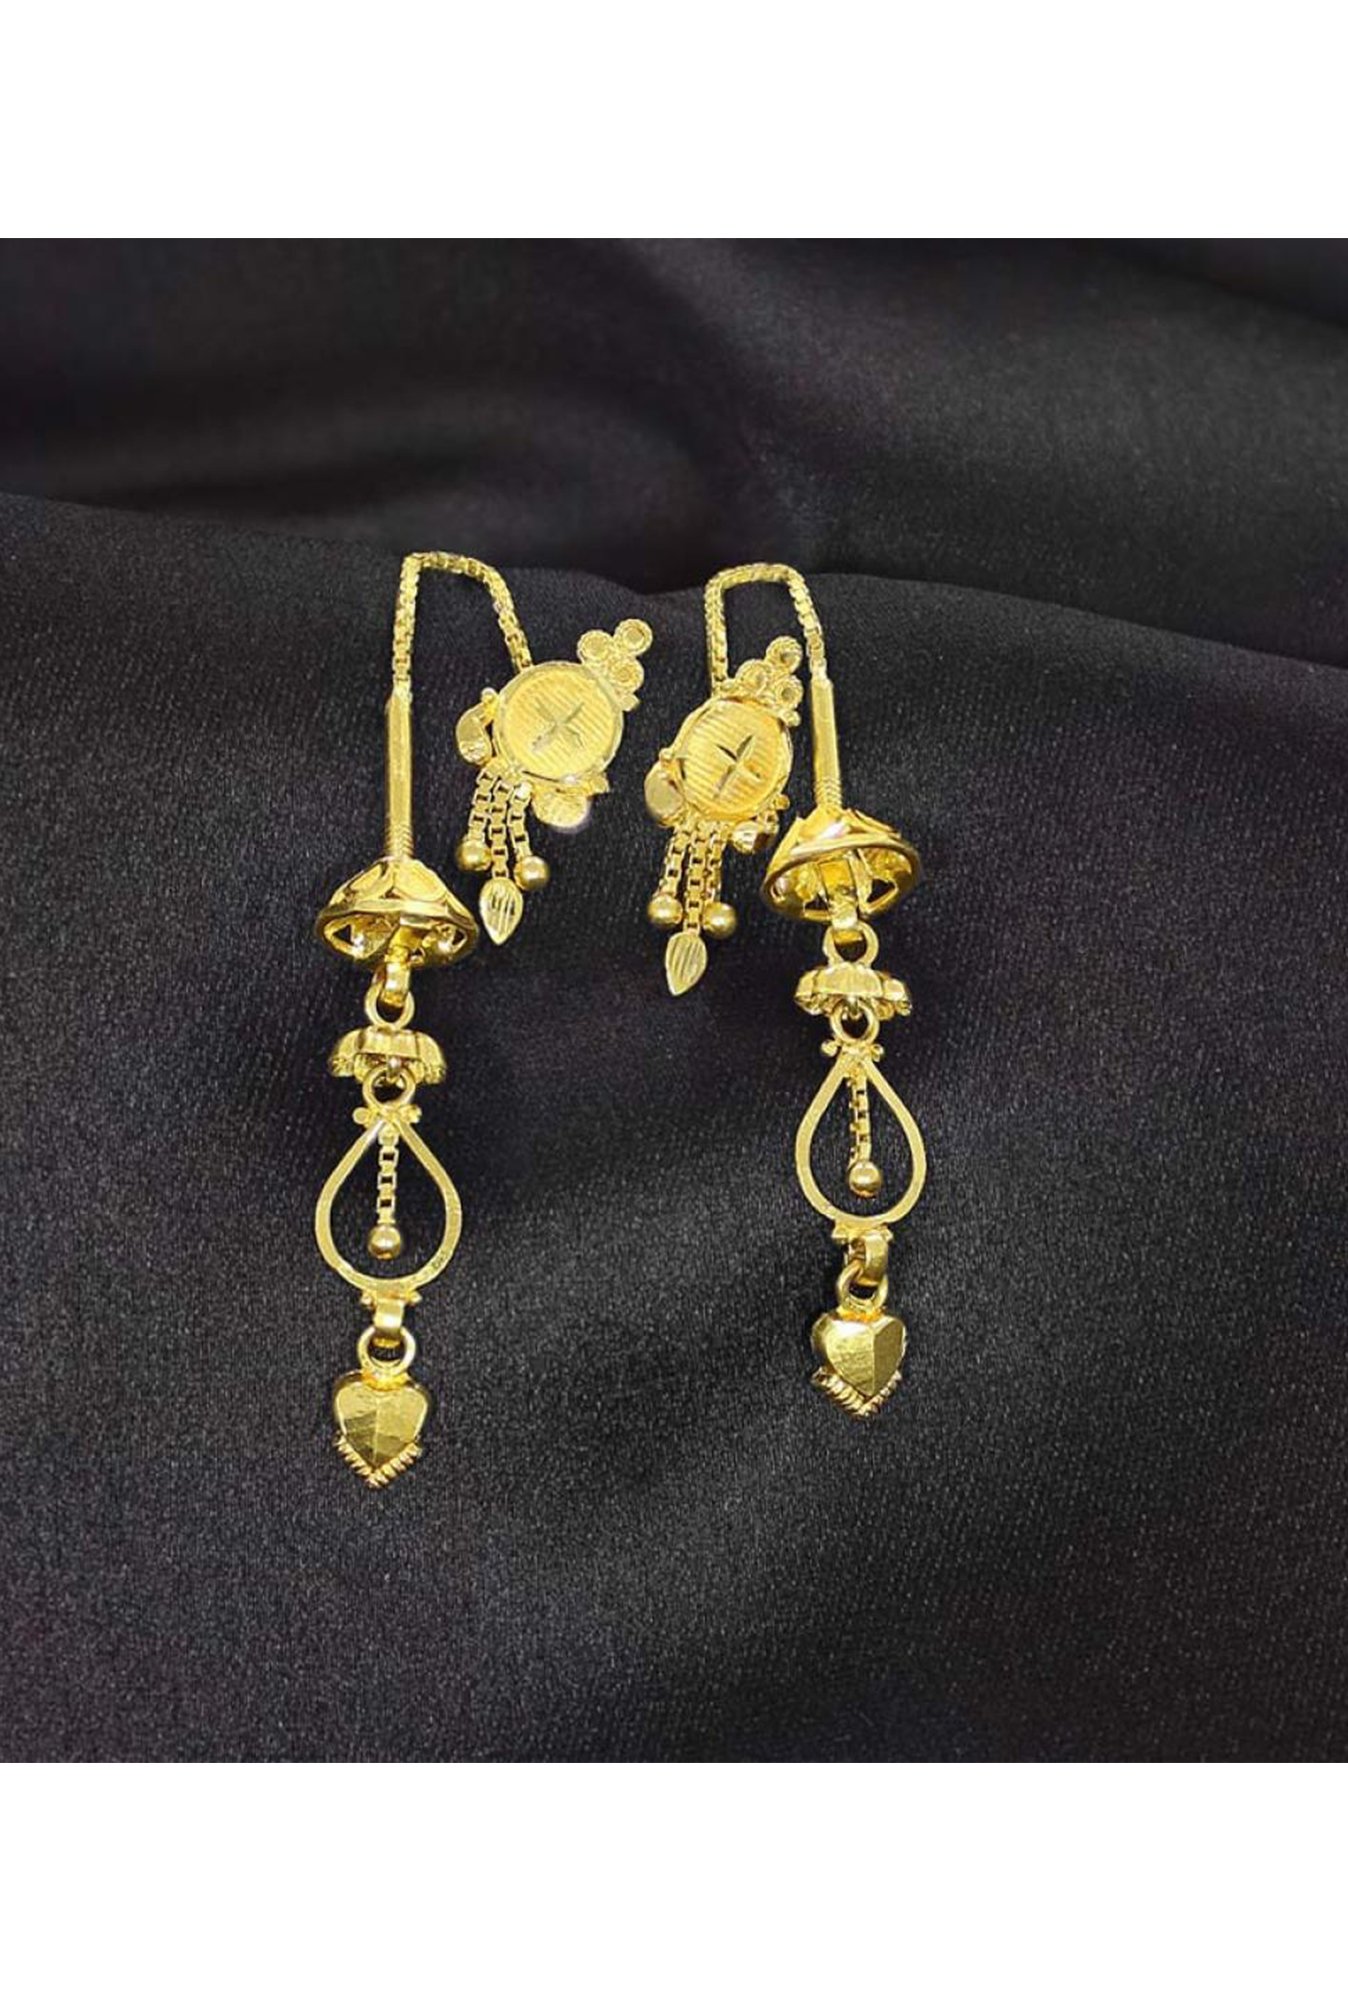 Buy Candere By Kalyan Jewellers 22k Gold Earrings Online At Best Price Tata Cliq,Small Patio Design Ideas On A Budget